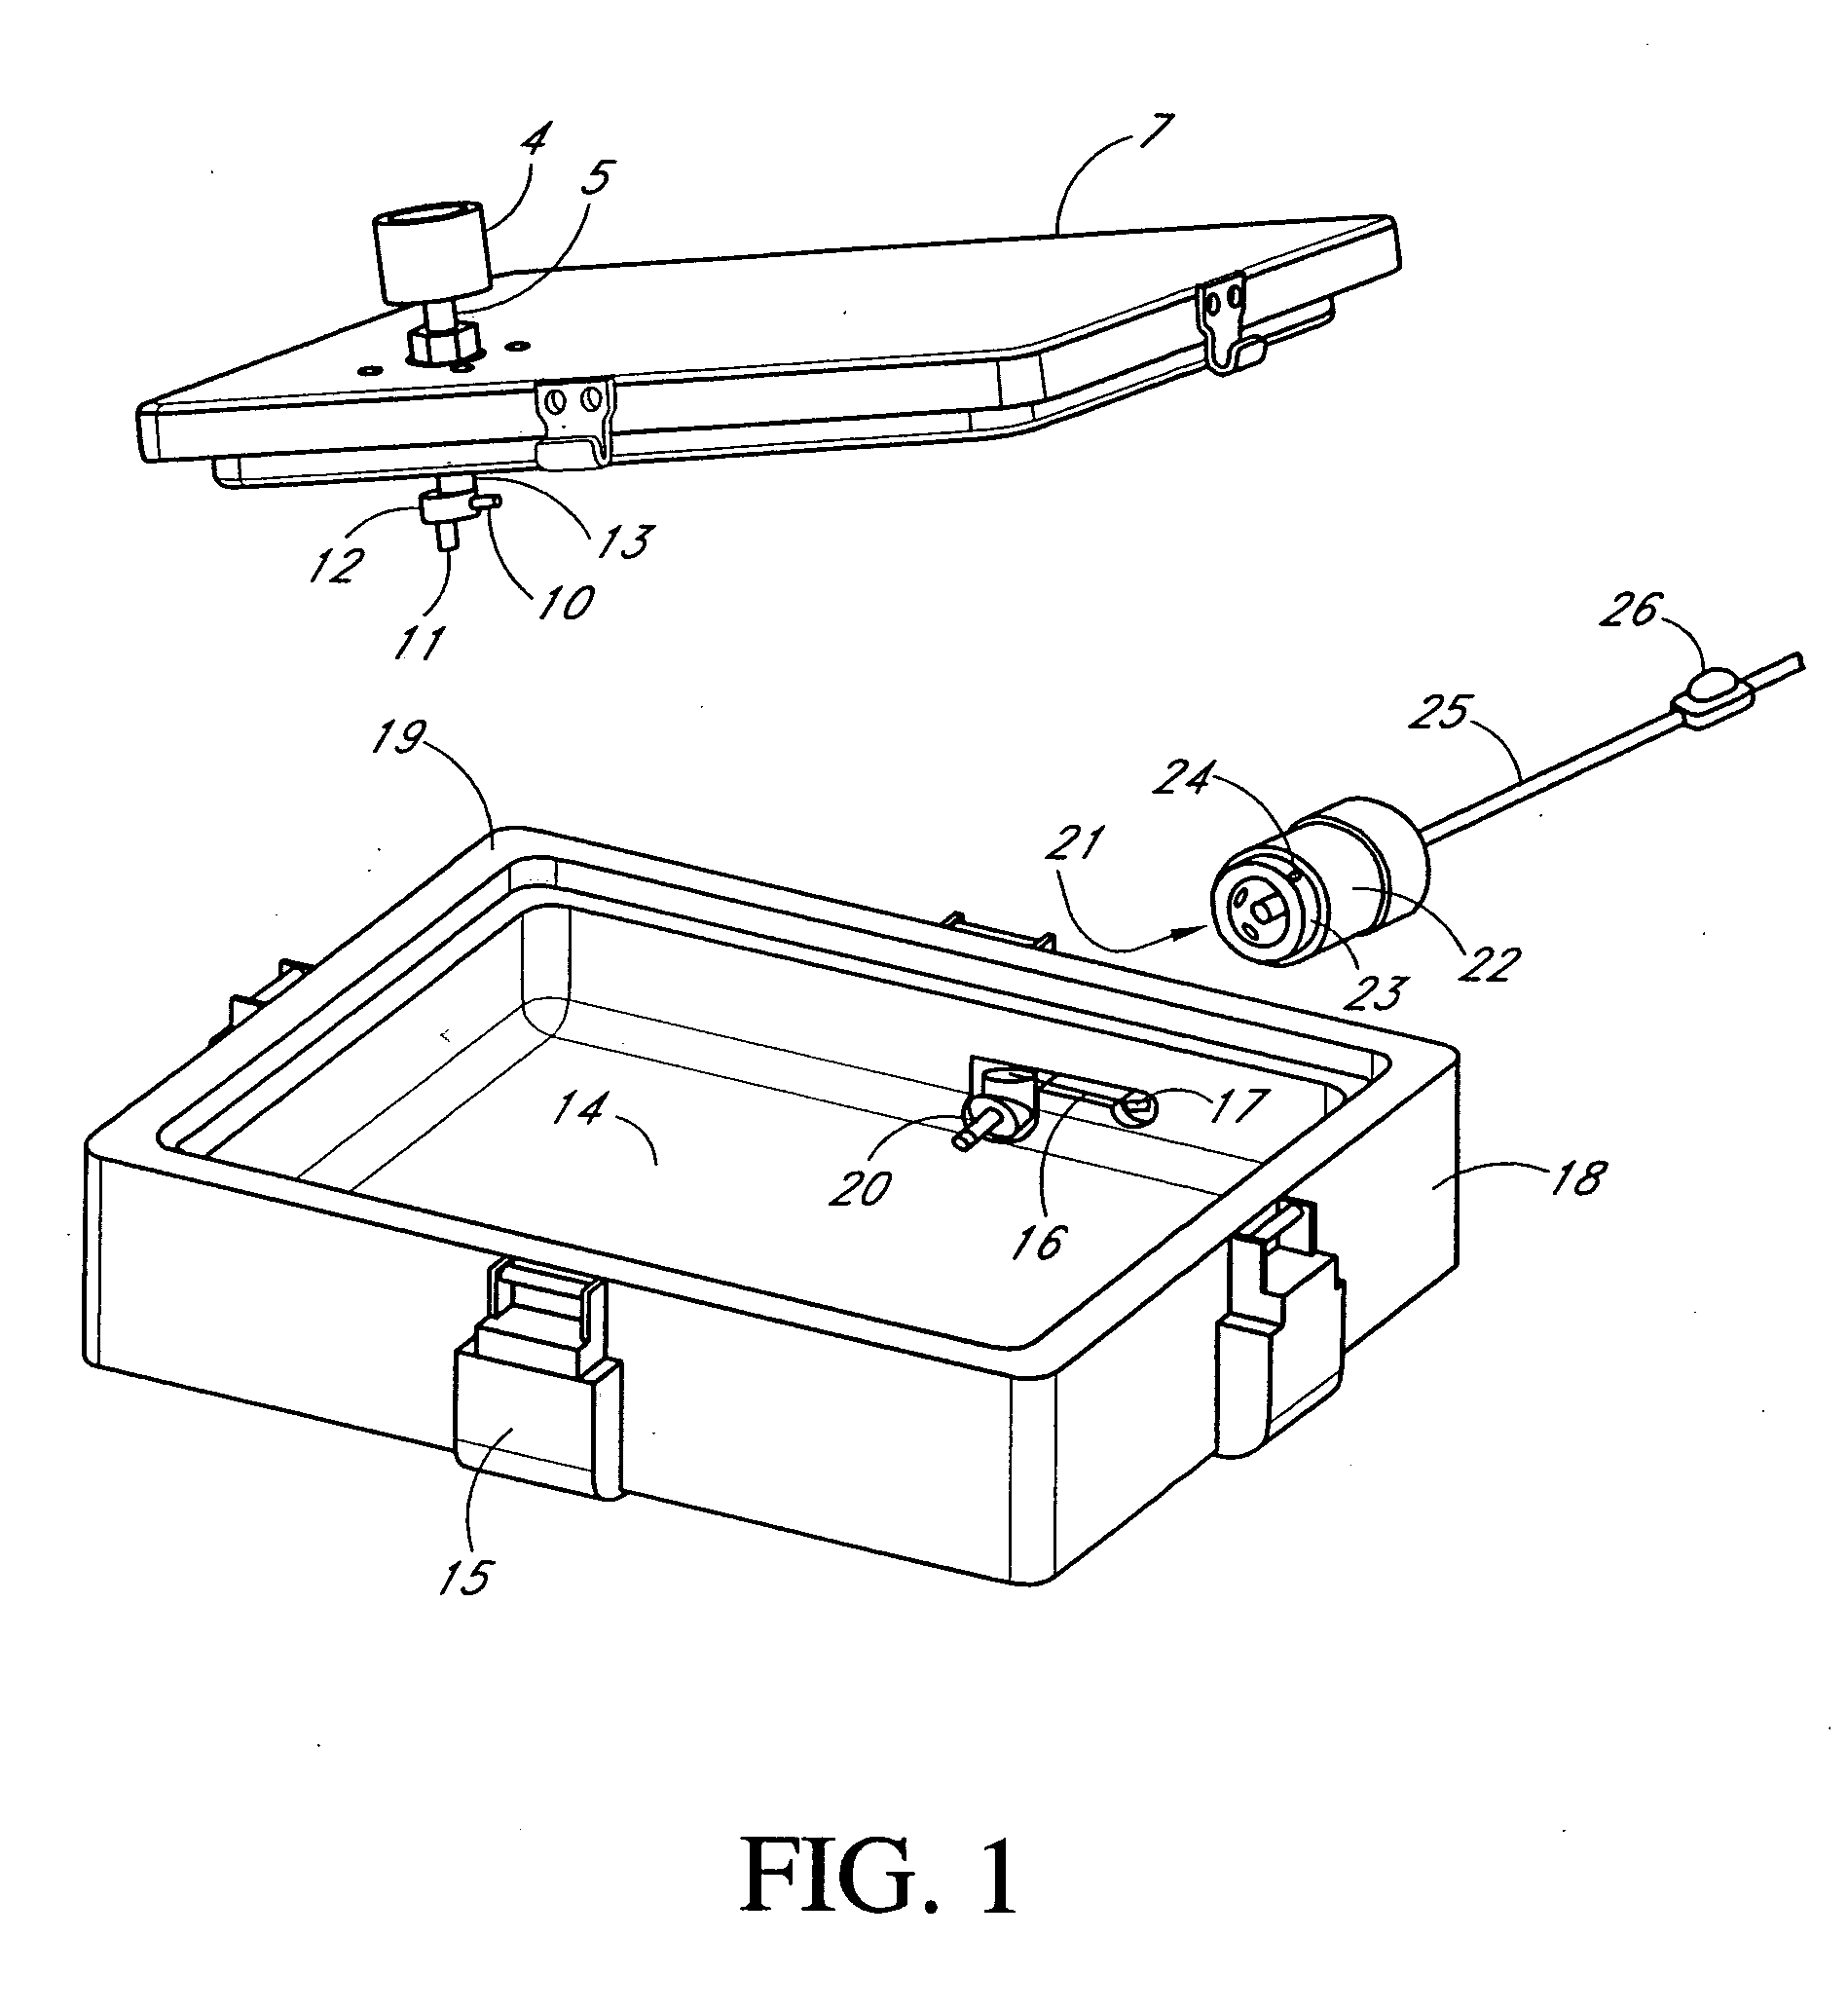 Protective housing for an audio device